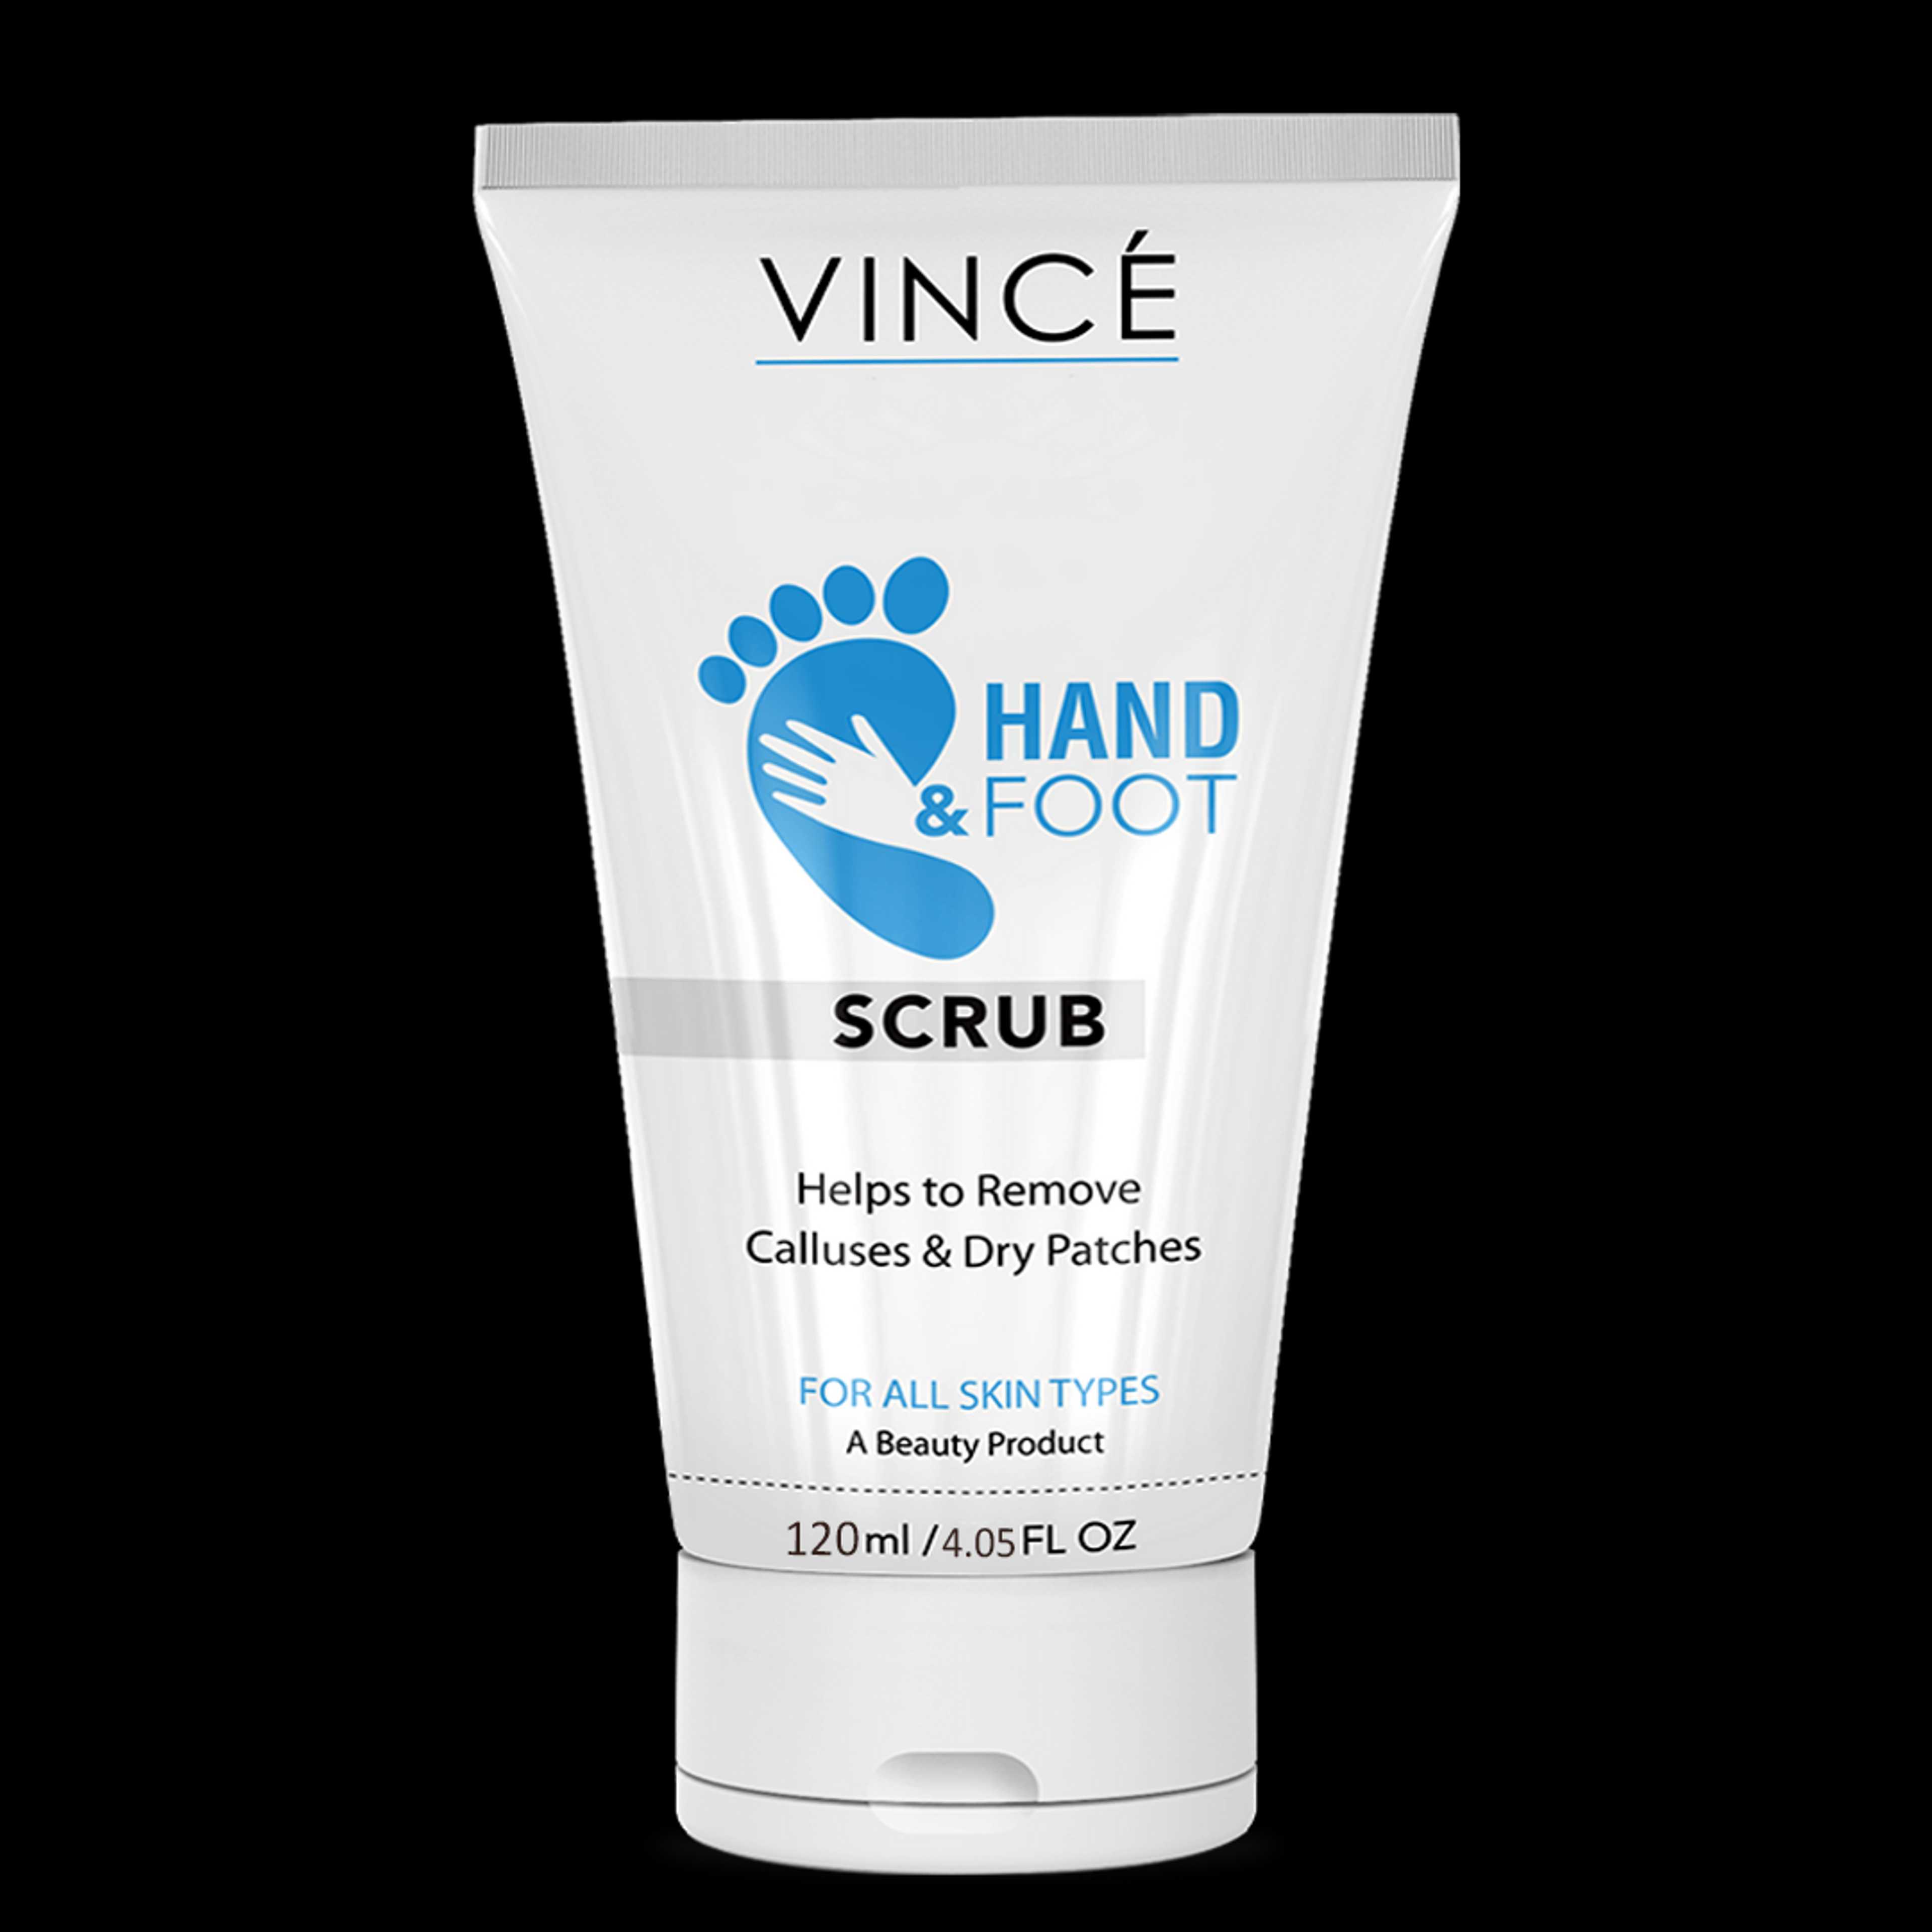 Vince_Hand & Foot Scrub Help To Removes Calluses And Dry Patches For All Skin Type By Vince_120ML